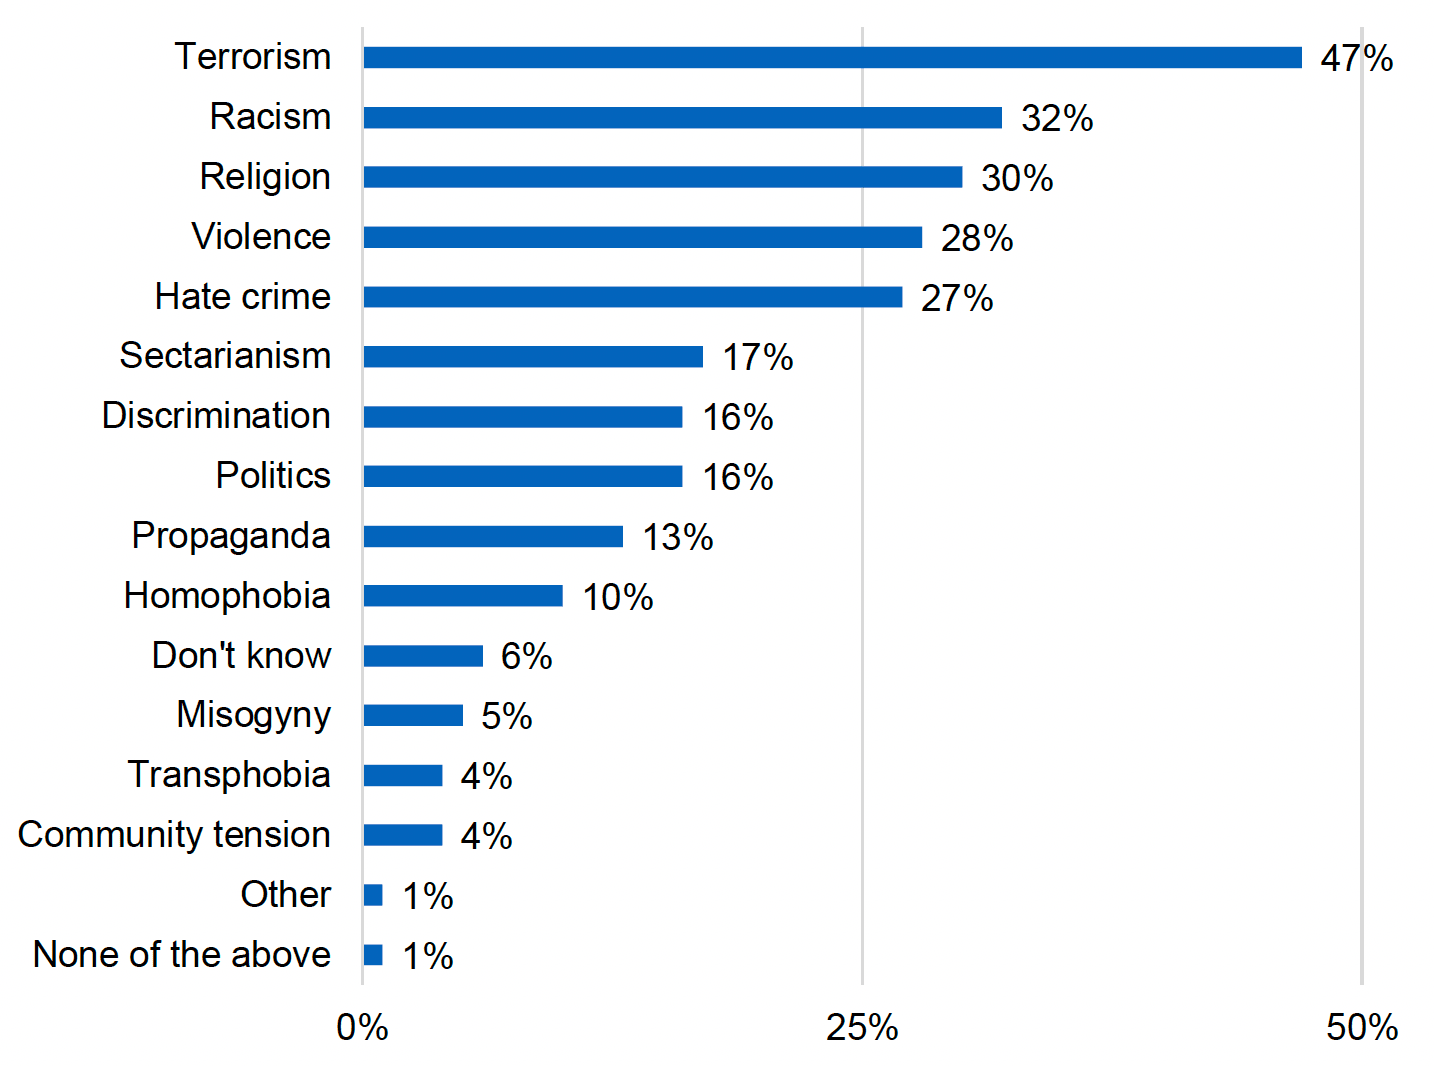 A bar chart showing which words are most strongly associated with extremism. The results are discussed in the main body of the text. 